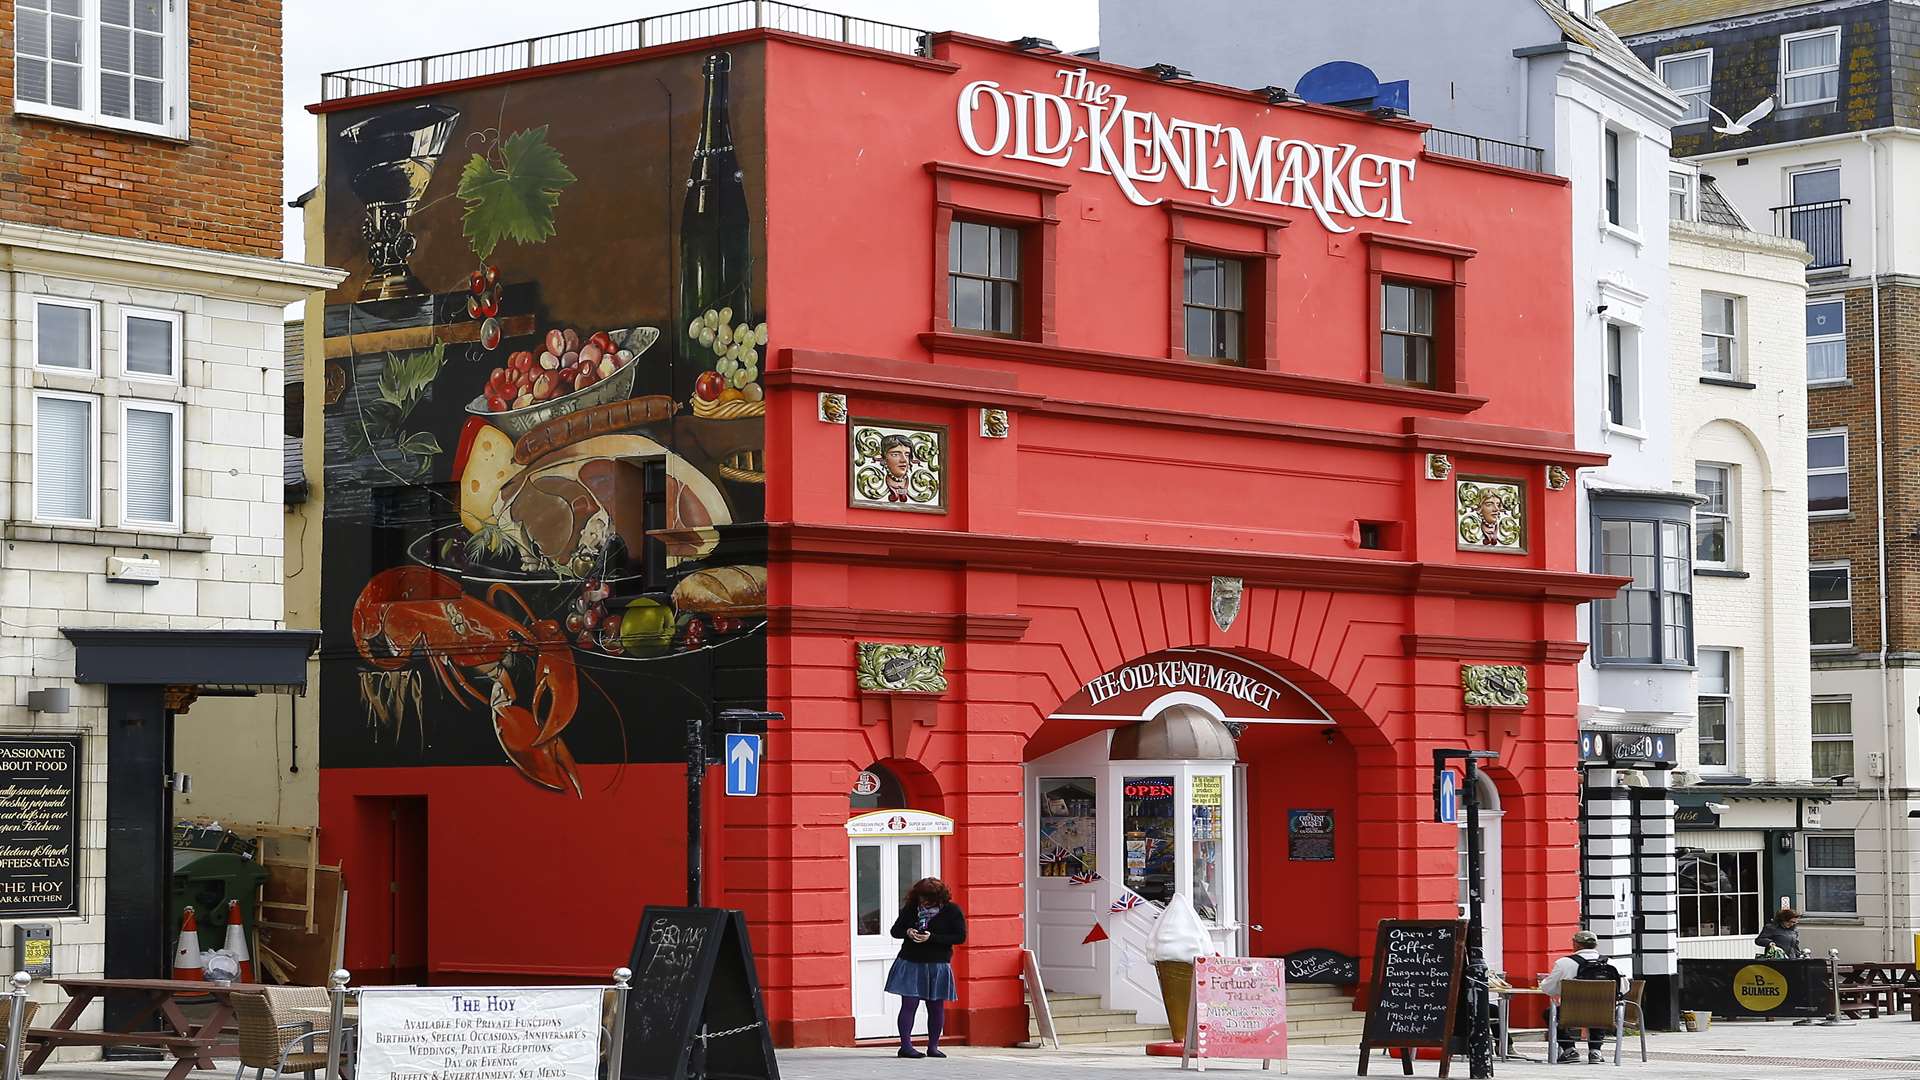 The Little Prince pub is located in The Old Kent Market in Margate